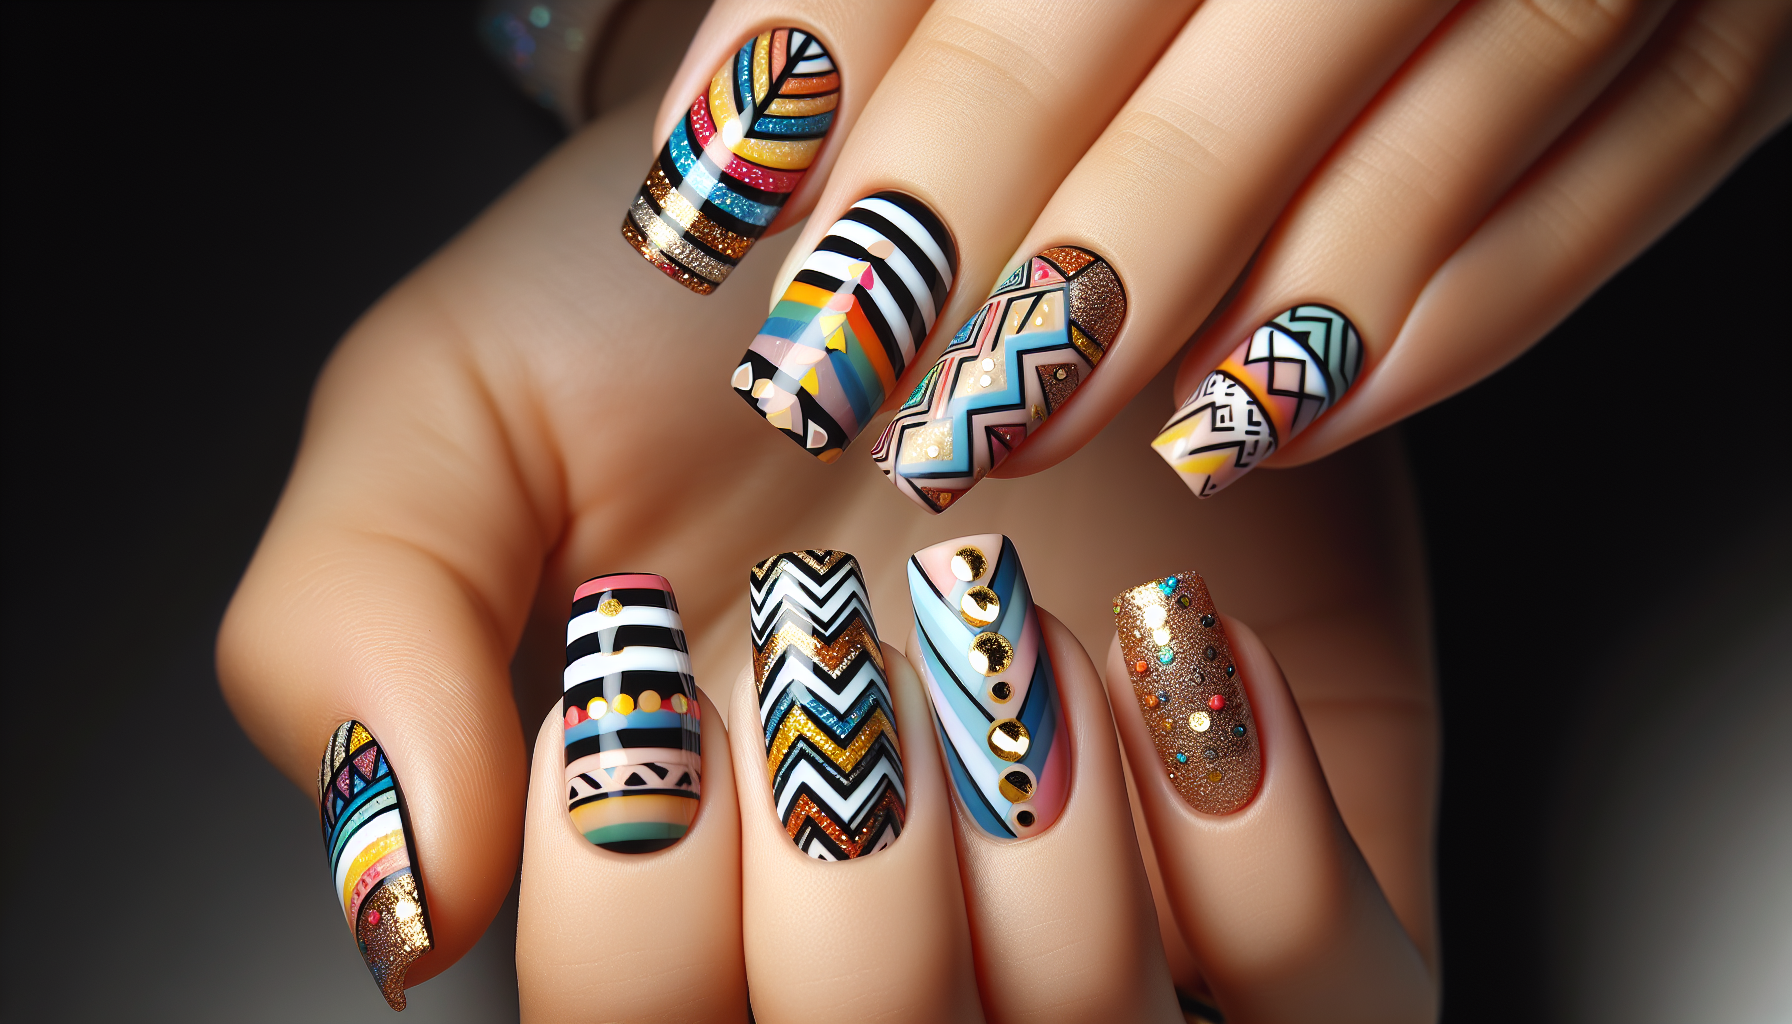 Geometric nail art design with rainbow colors and gold glitter